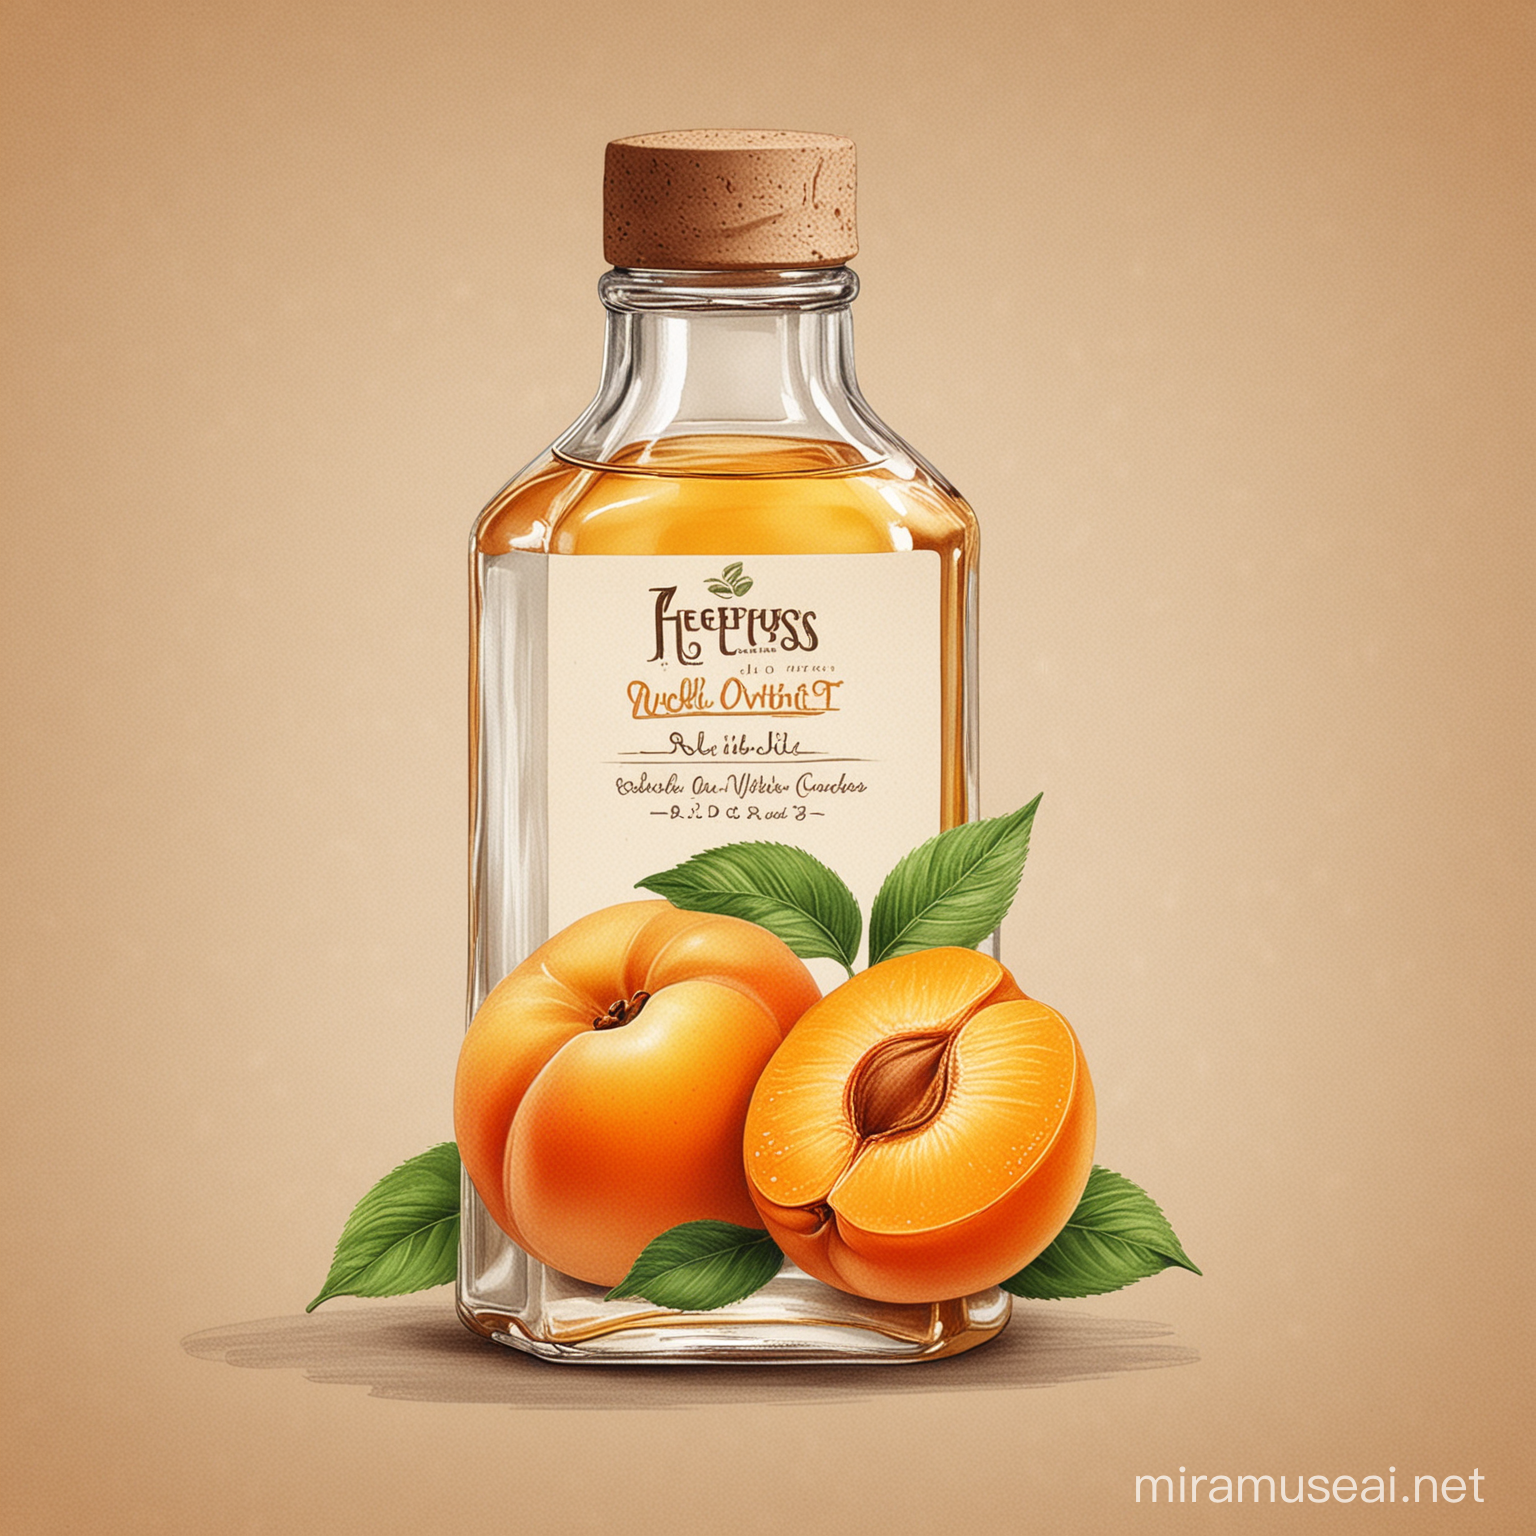 Draw a sketch of a product bottle illustration for a natural apricot oil company.